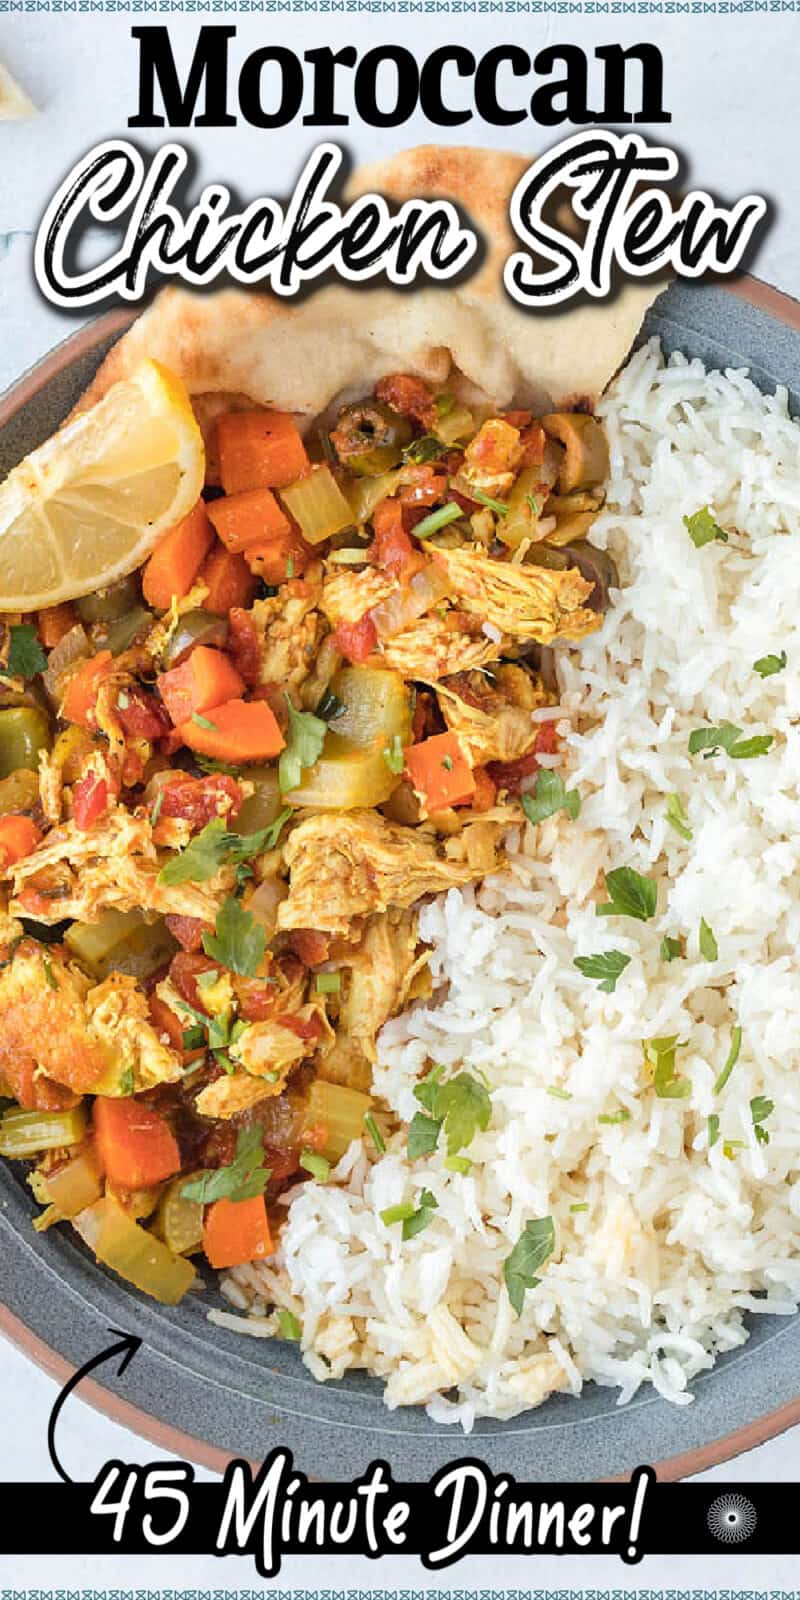 food in a bowl with rice, with Moroccan Chicken Stew